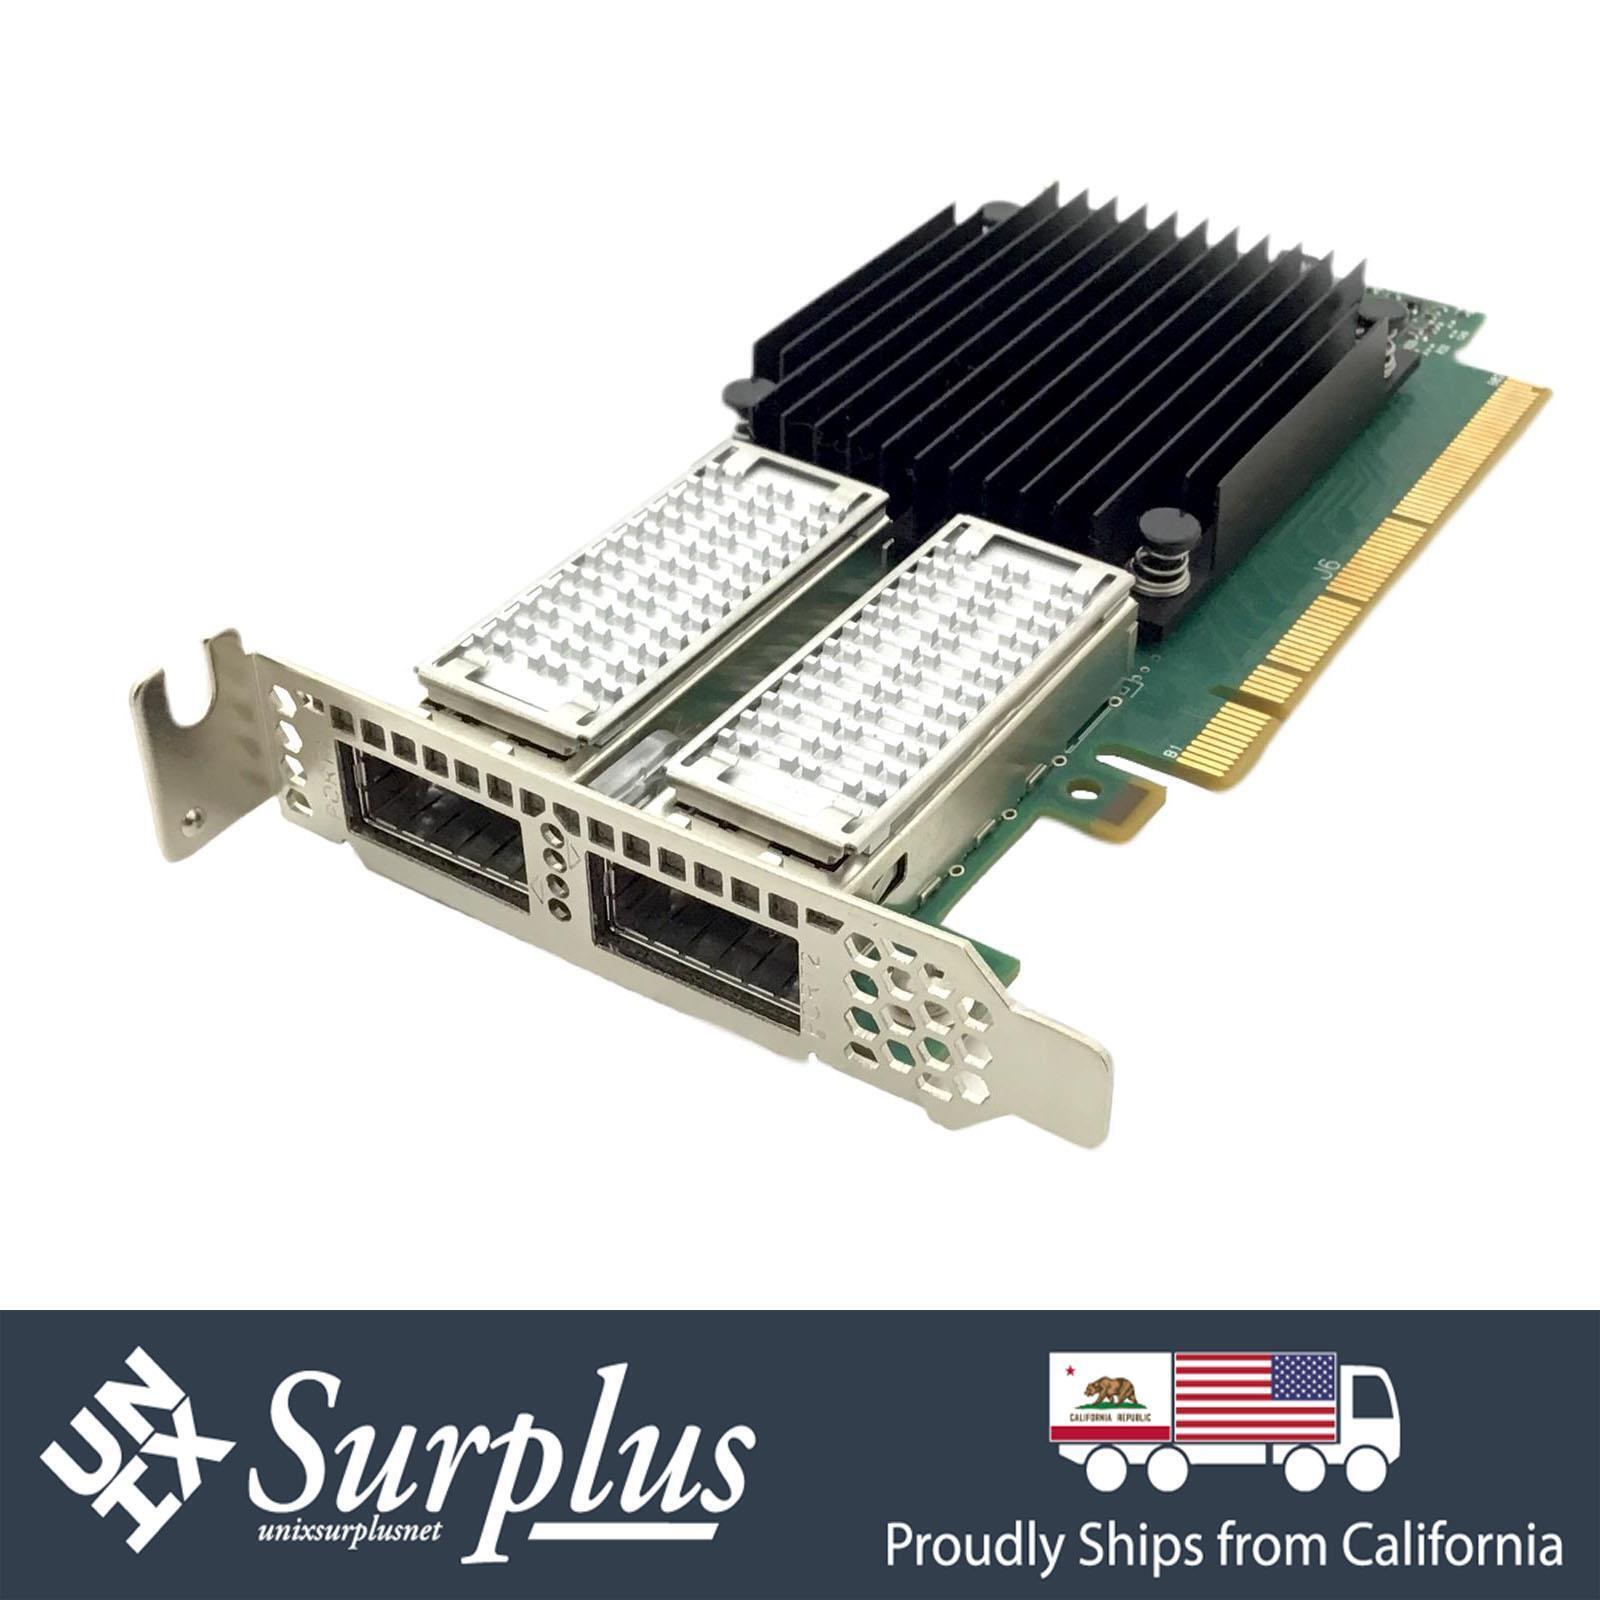 IBM 00RX852 Dual Port FDR InfiniBand 56GbE NIC PCIe x16 Adapter Low Profile